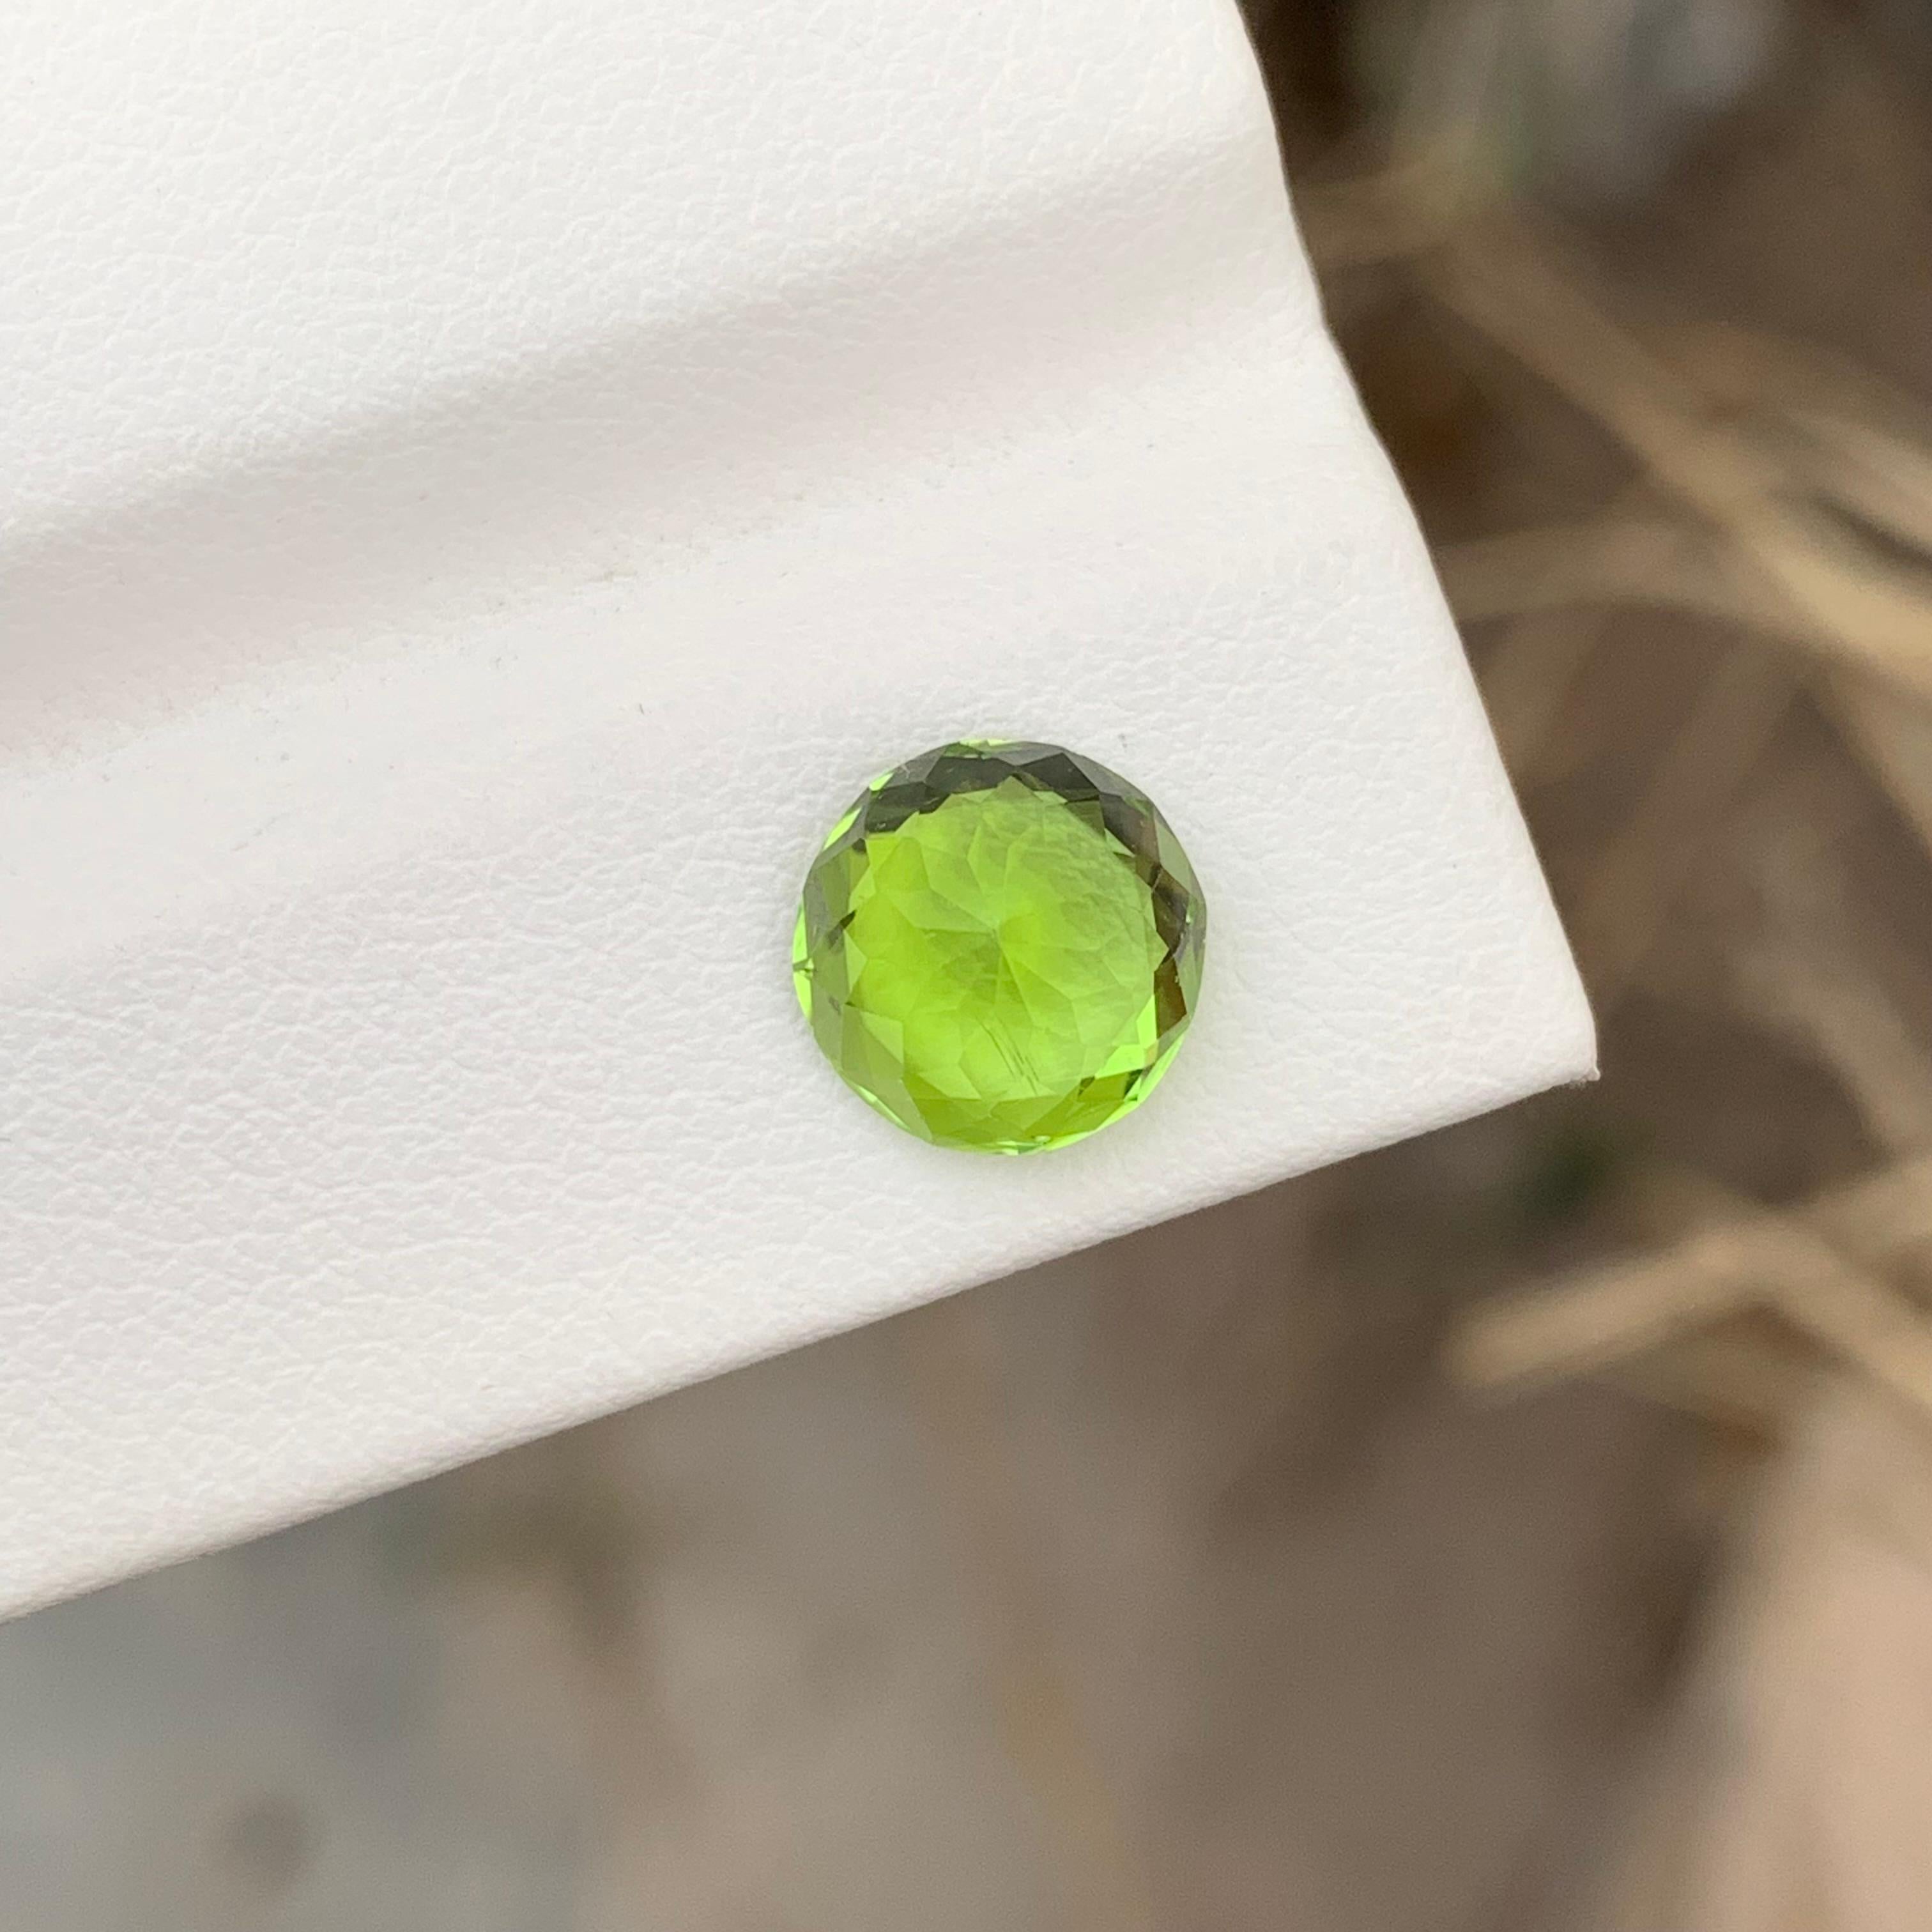 Loose Peridot
Weight: 8.7x8.7x5.8 Mm
Origin: Suppat Valley Pakistan 
Shape: Round
Color: Green
Treatment: Non
Certificate: On Demand 
Peridot, a radiant gemstone with a distinctive green hue, has been cherished for centuries for its unique beauty